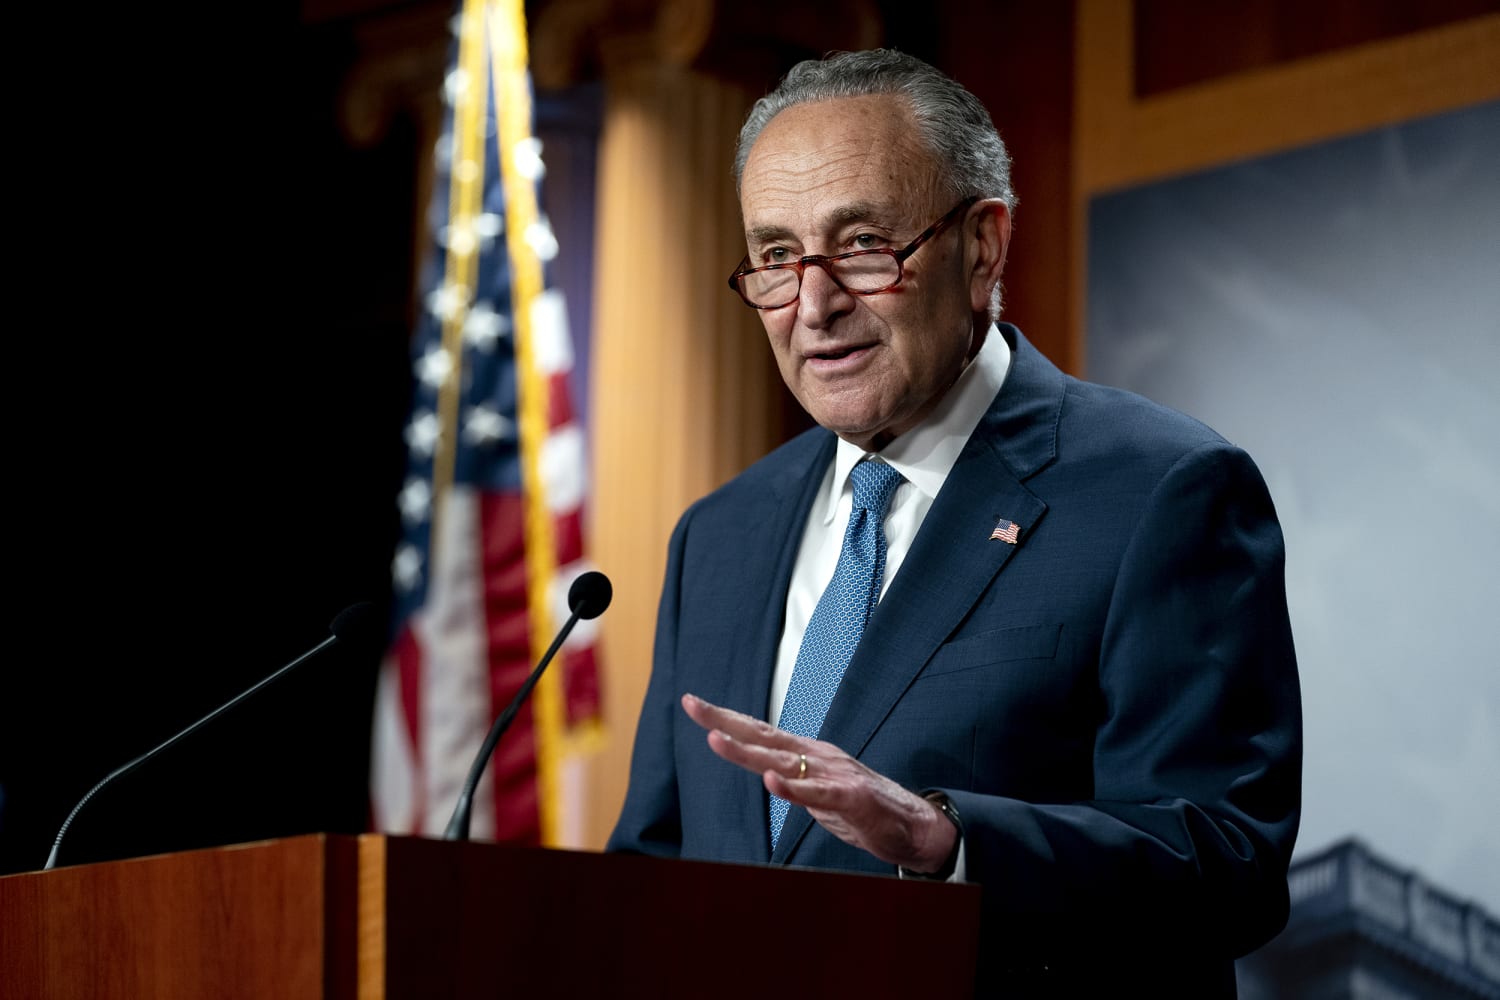 Democrats fall short in third attempt to get immigration in Build Back Better bill